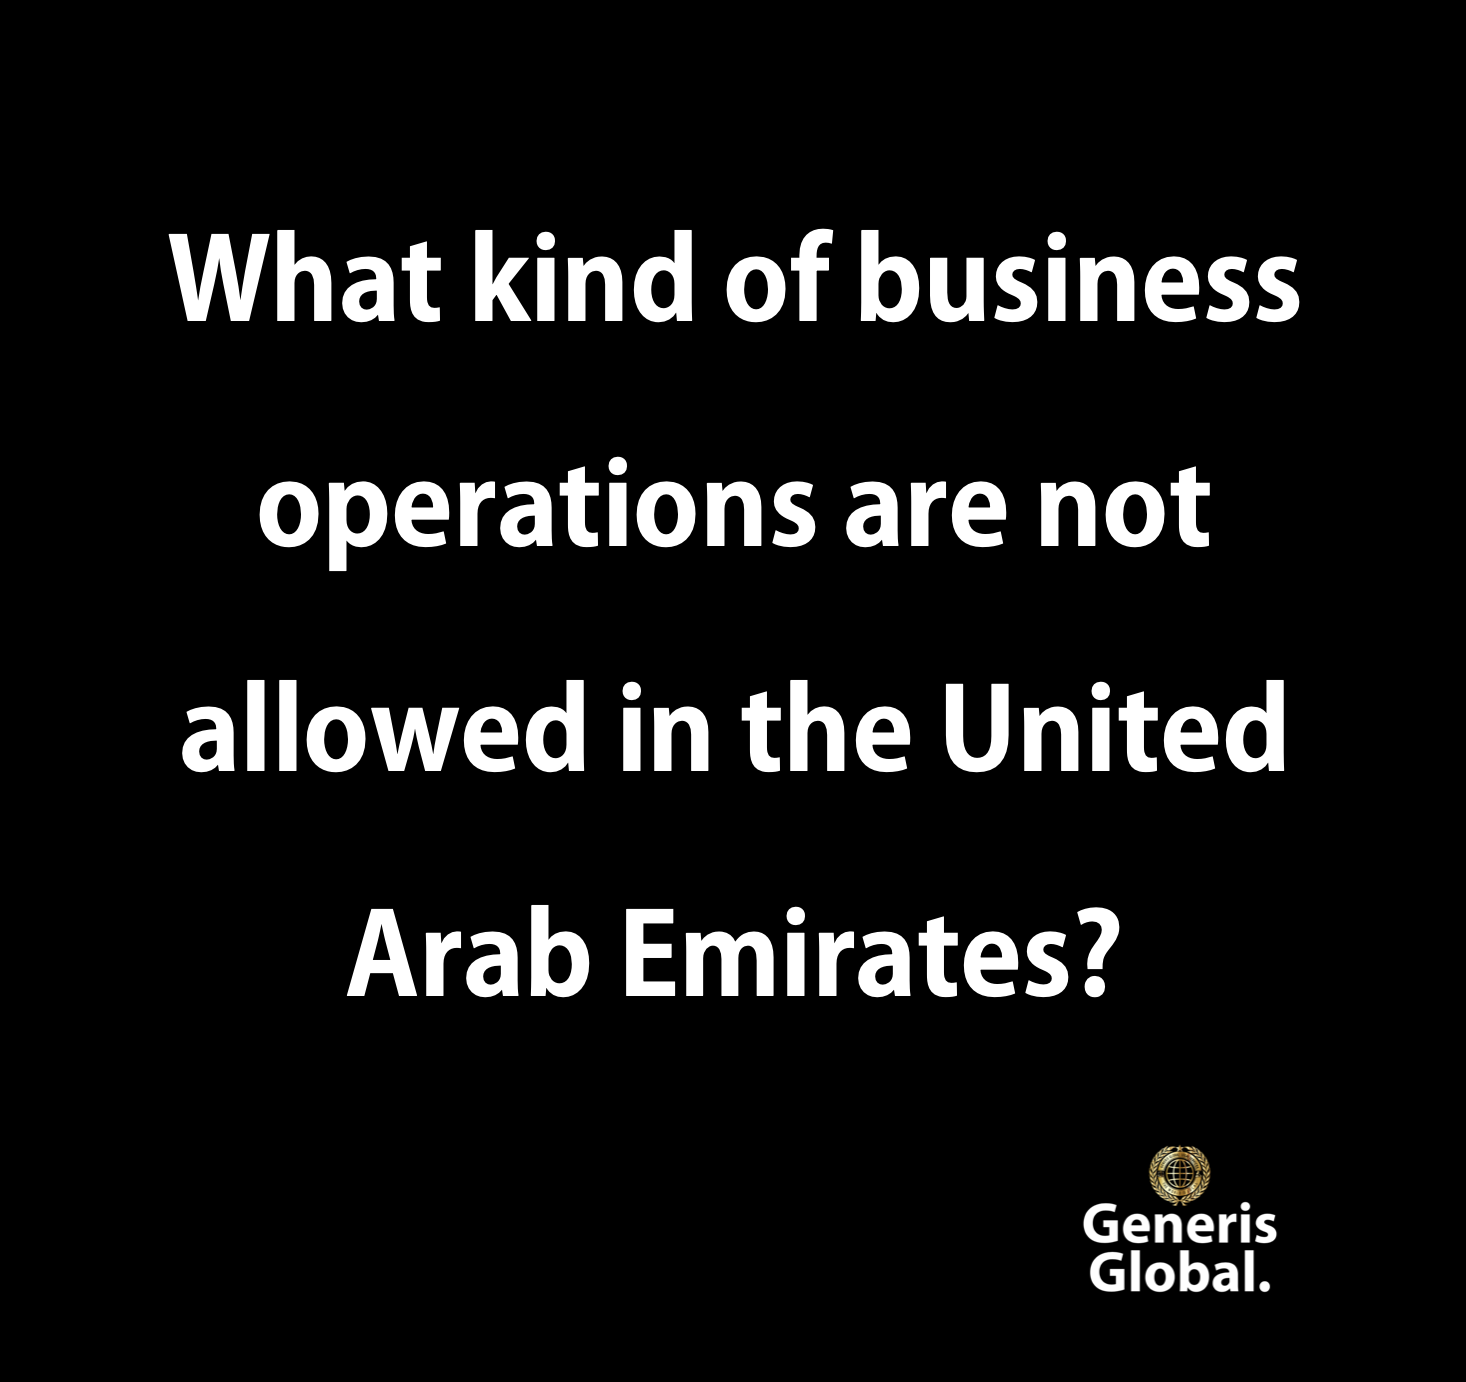 What kind of business operations are not allowed in the United Arab Emirates?